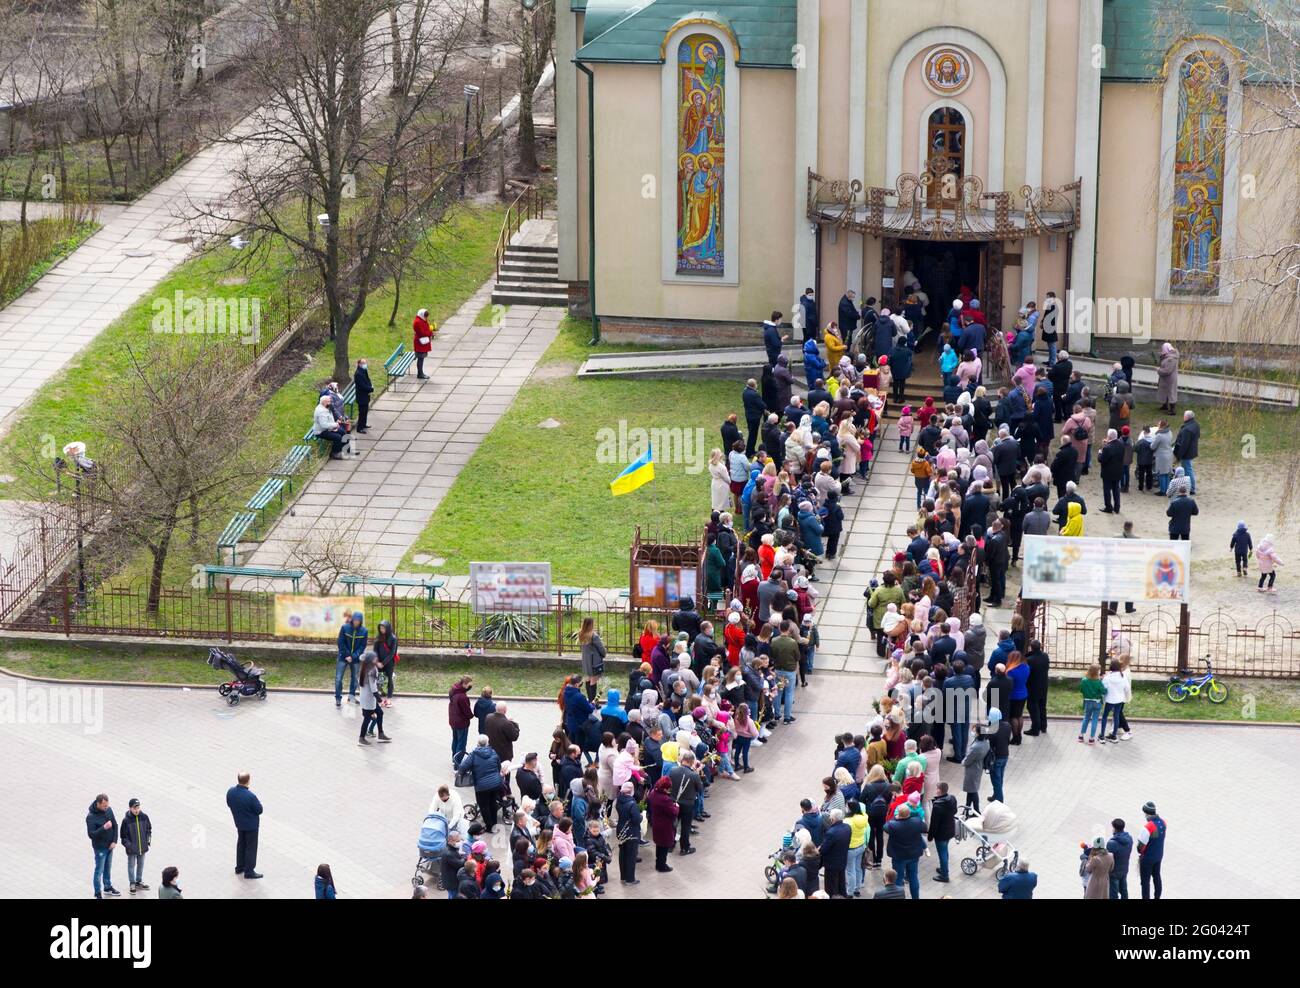 Consecration of willow branches on Palm Sunday near the Cathedral of Lviv, April 21, 2021. View from above Stock Photo